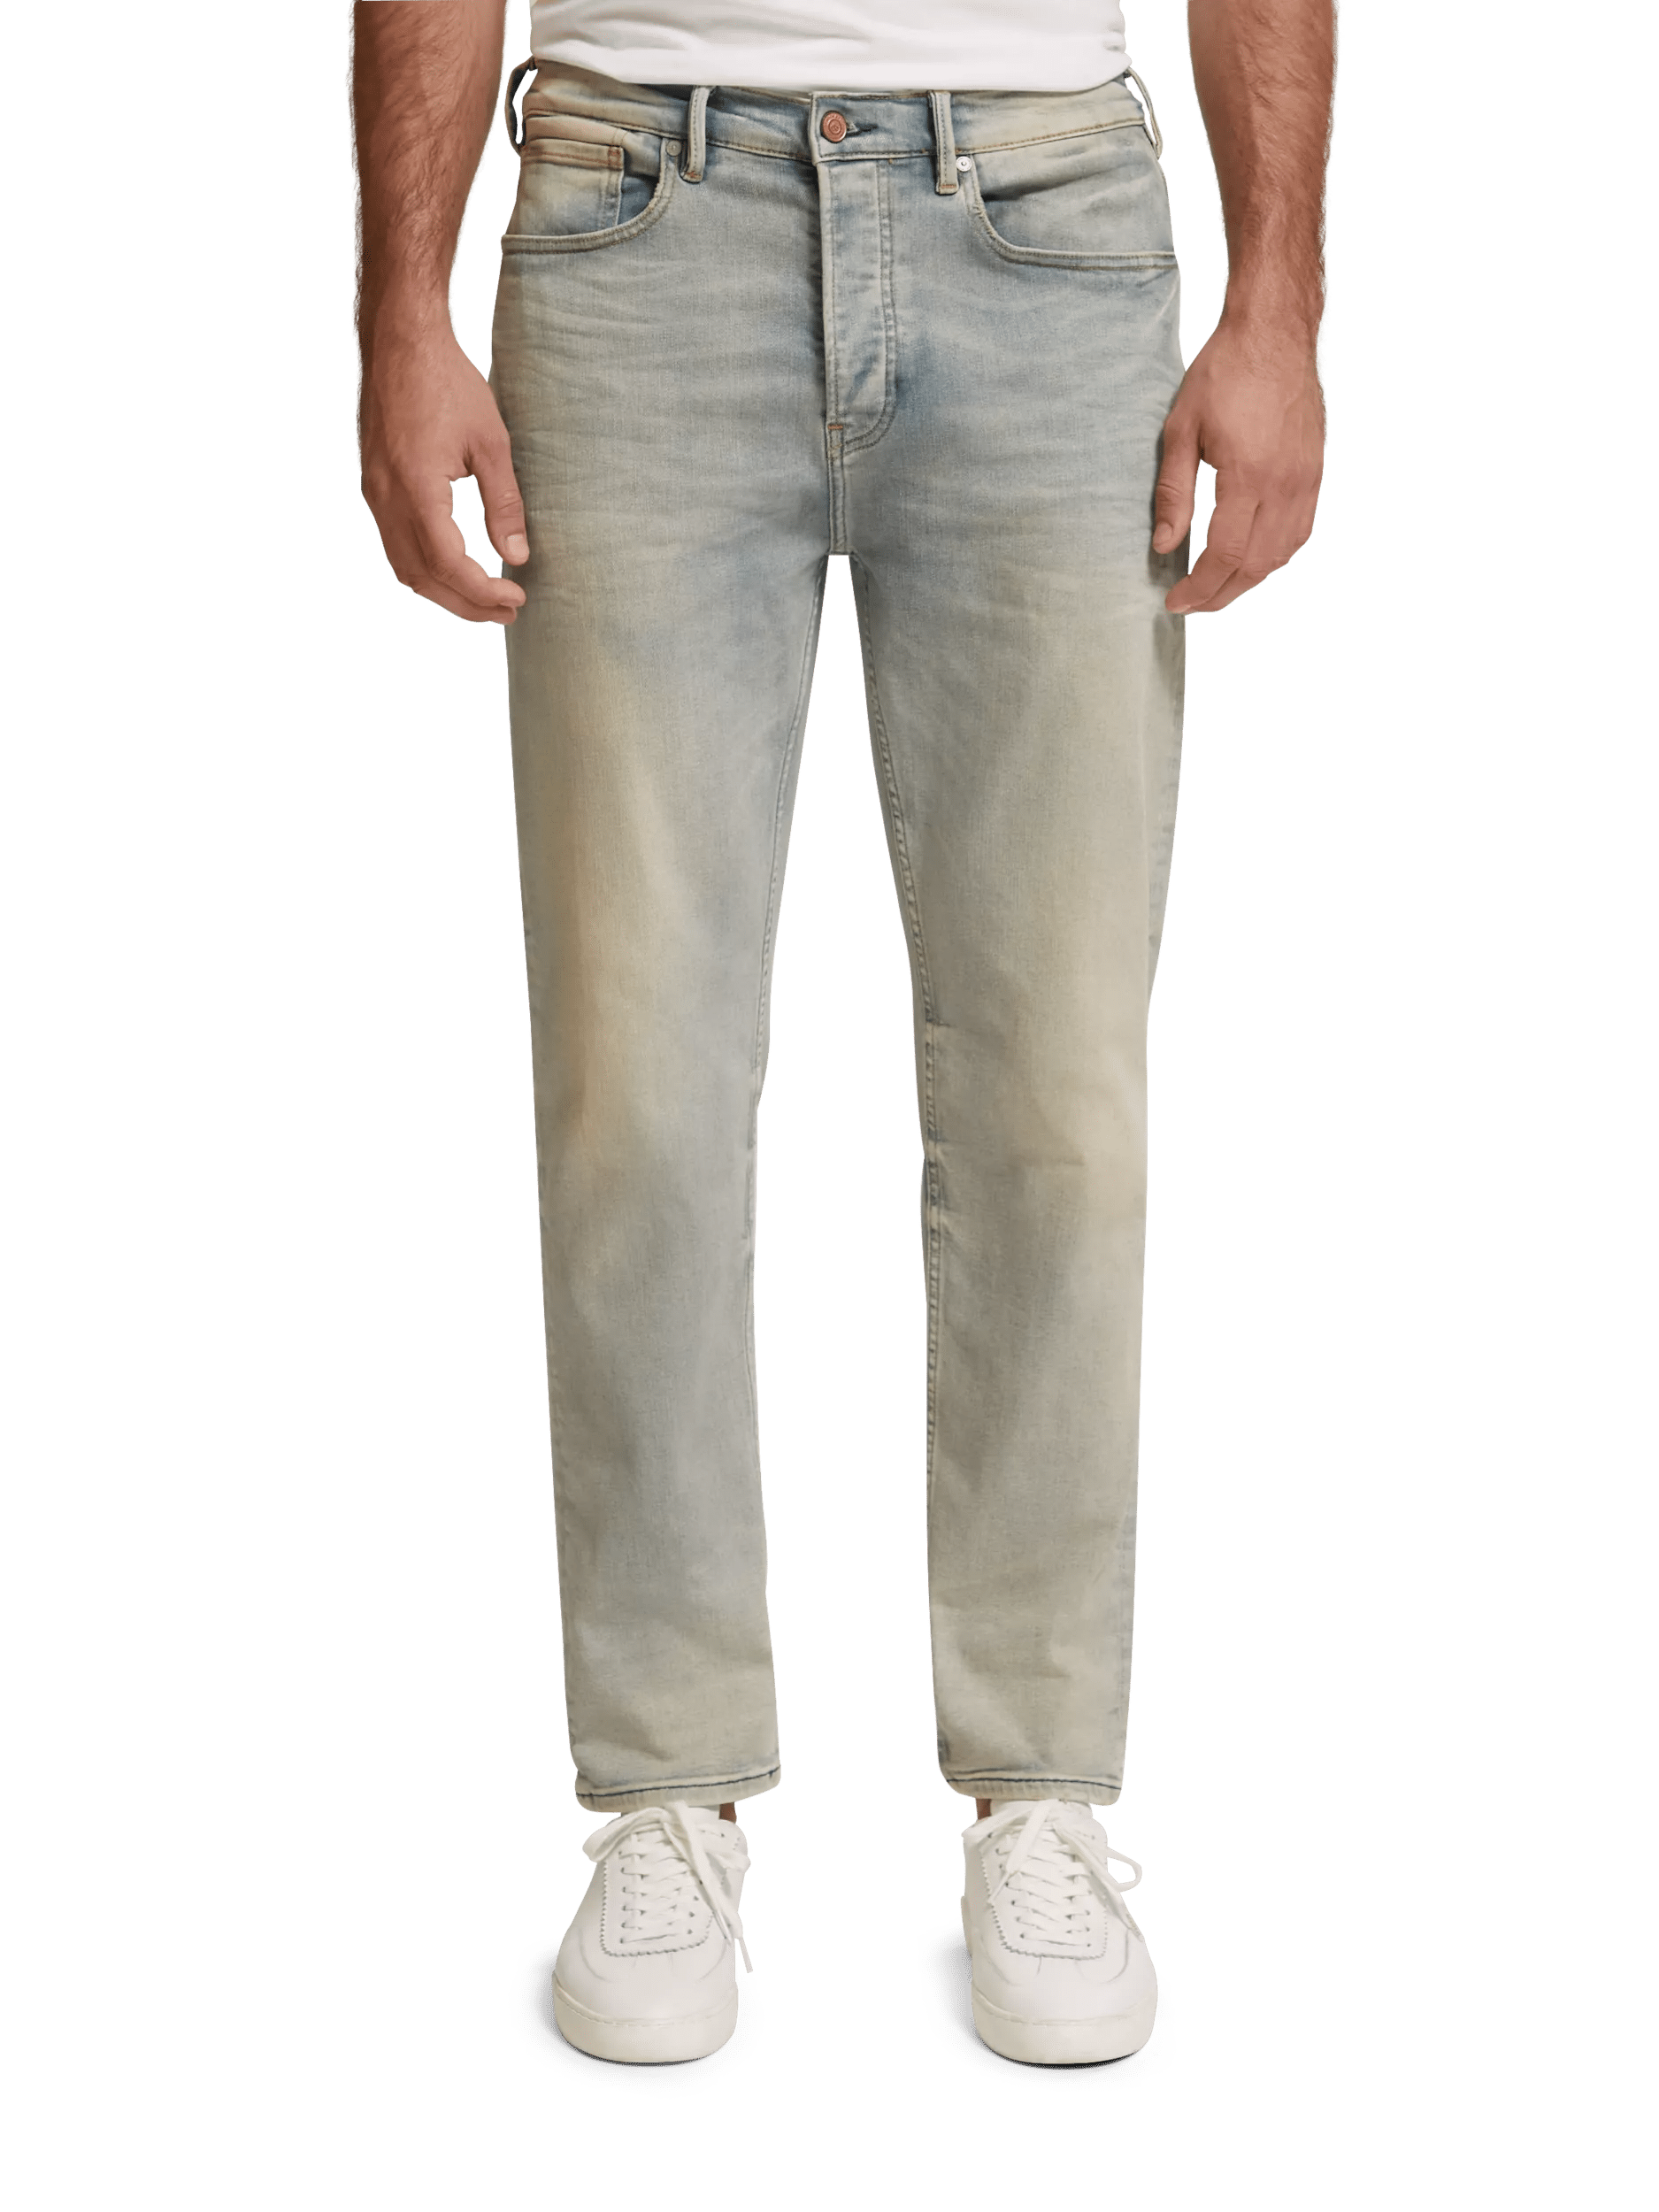 How to find perfect fitting jeans – Nudie Jeans®